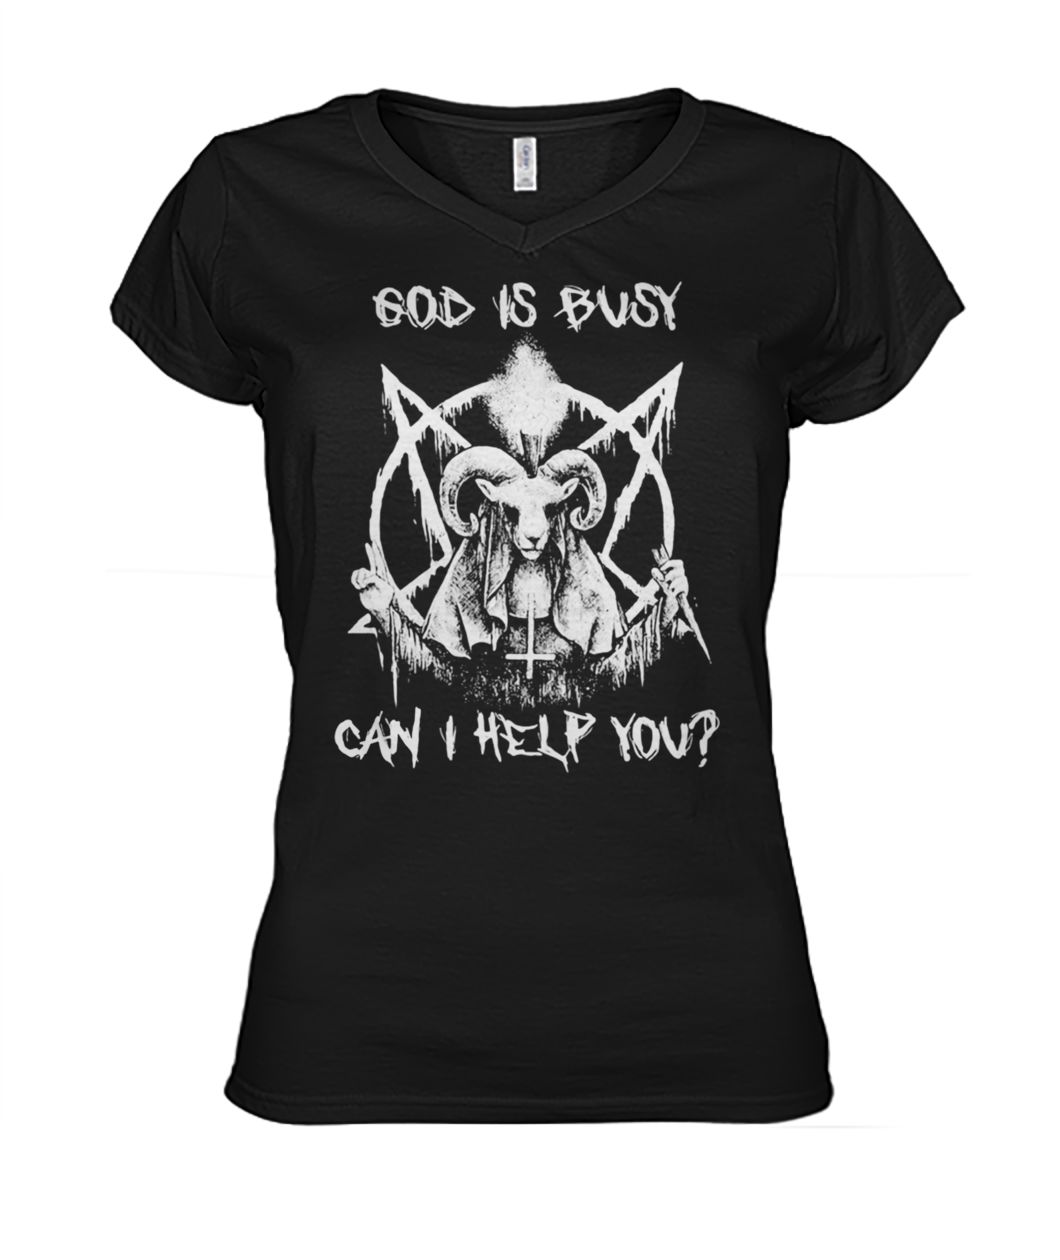 Satan God is busy can I help you women's v-neck